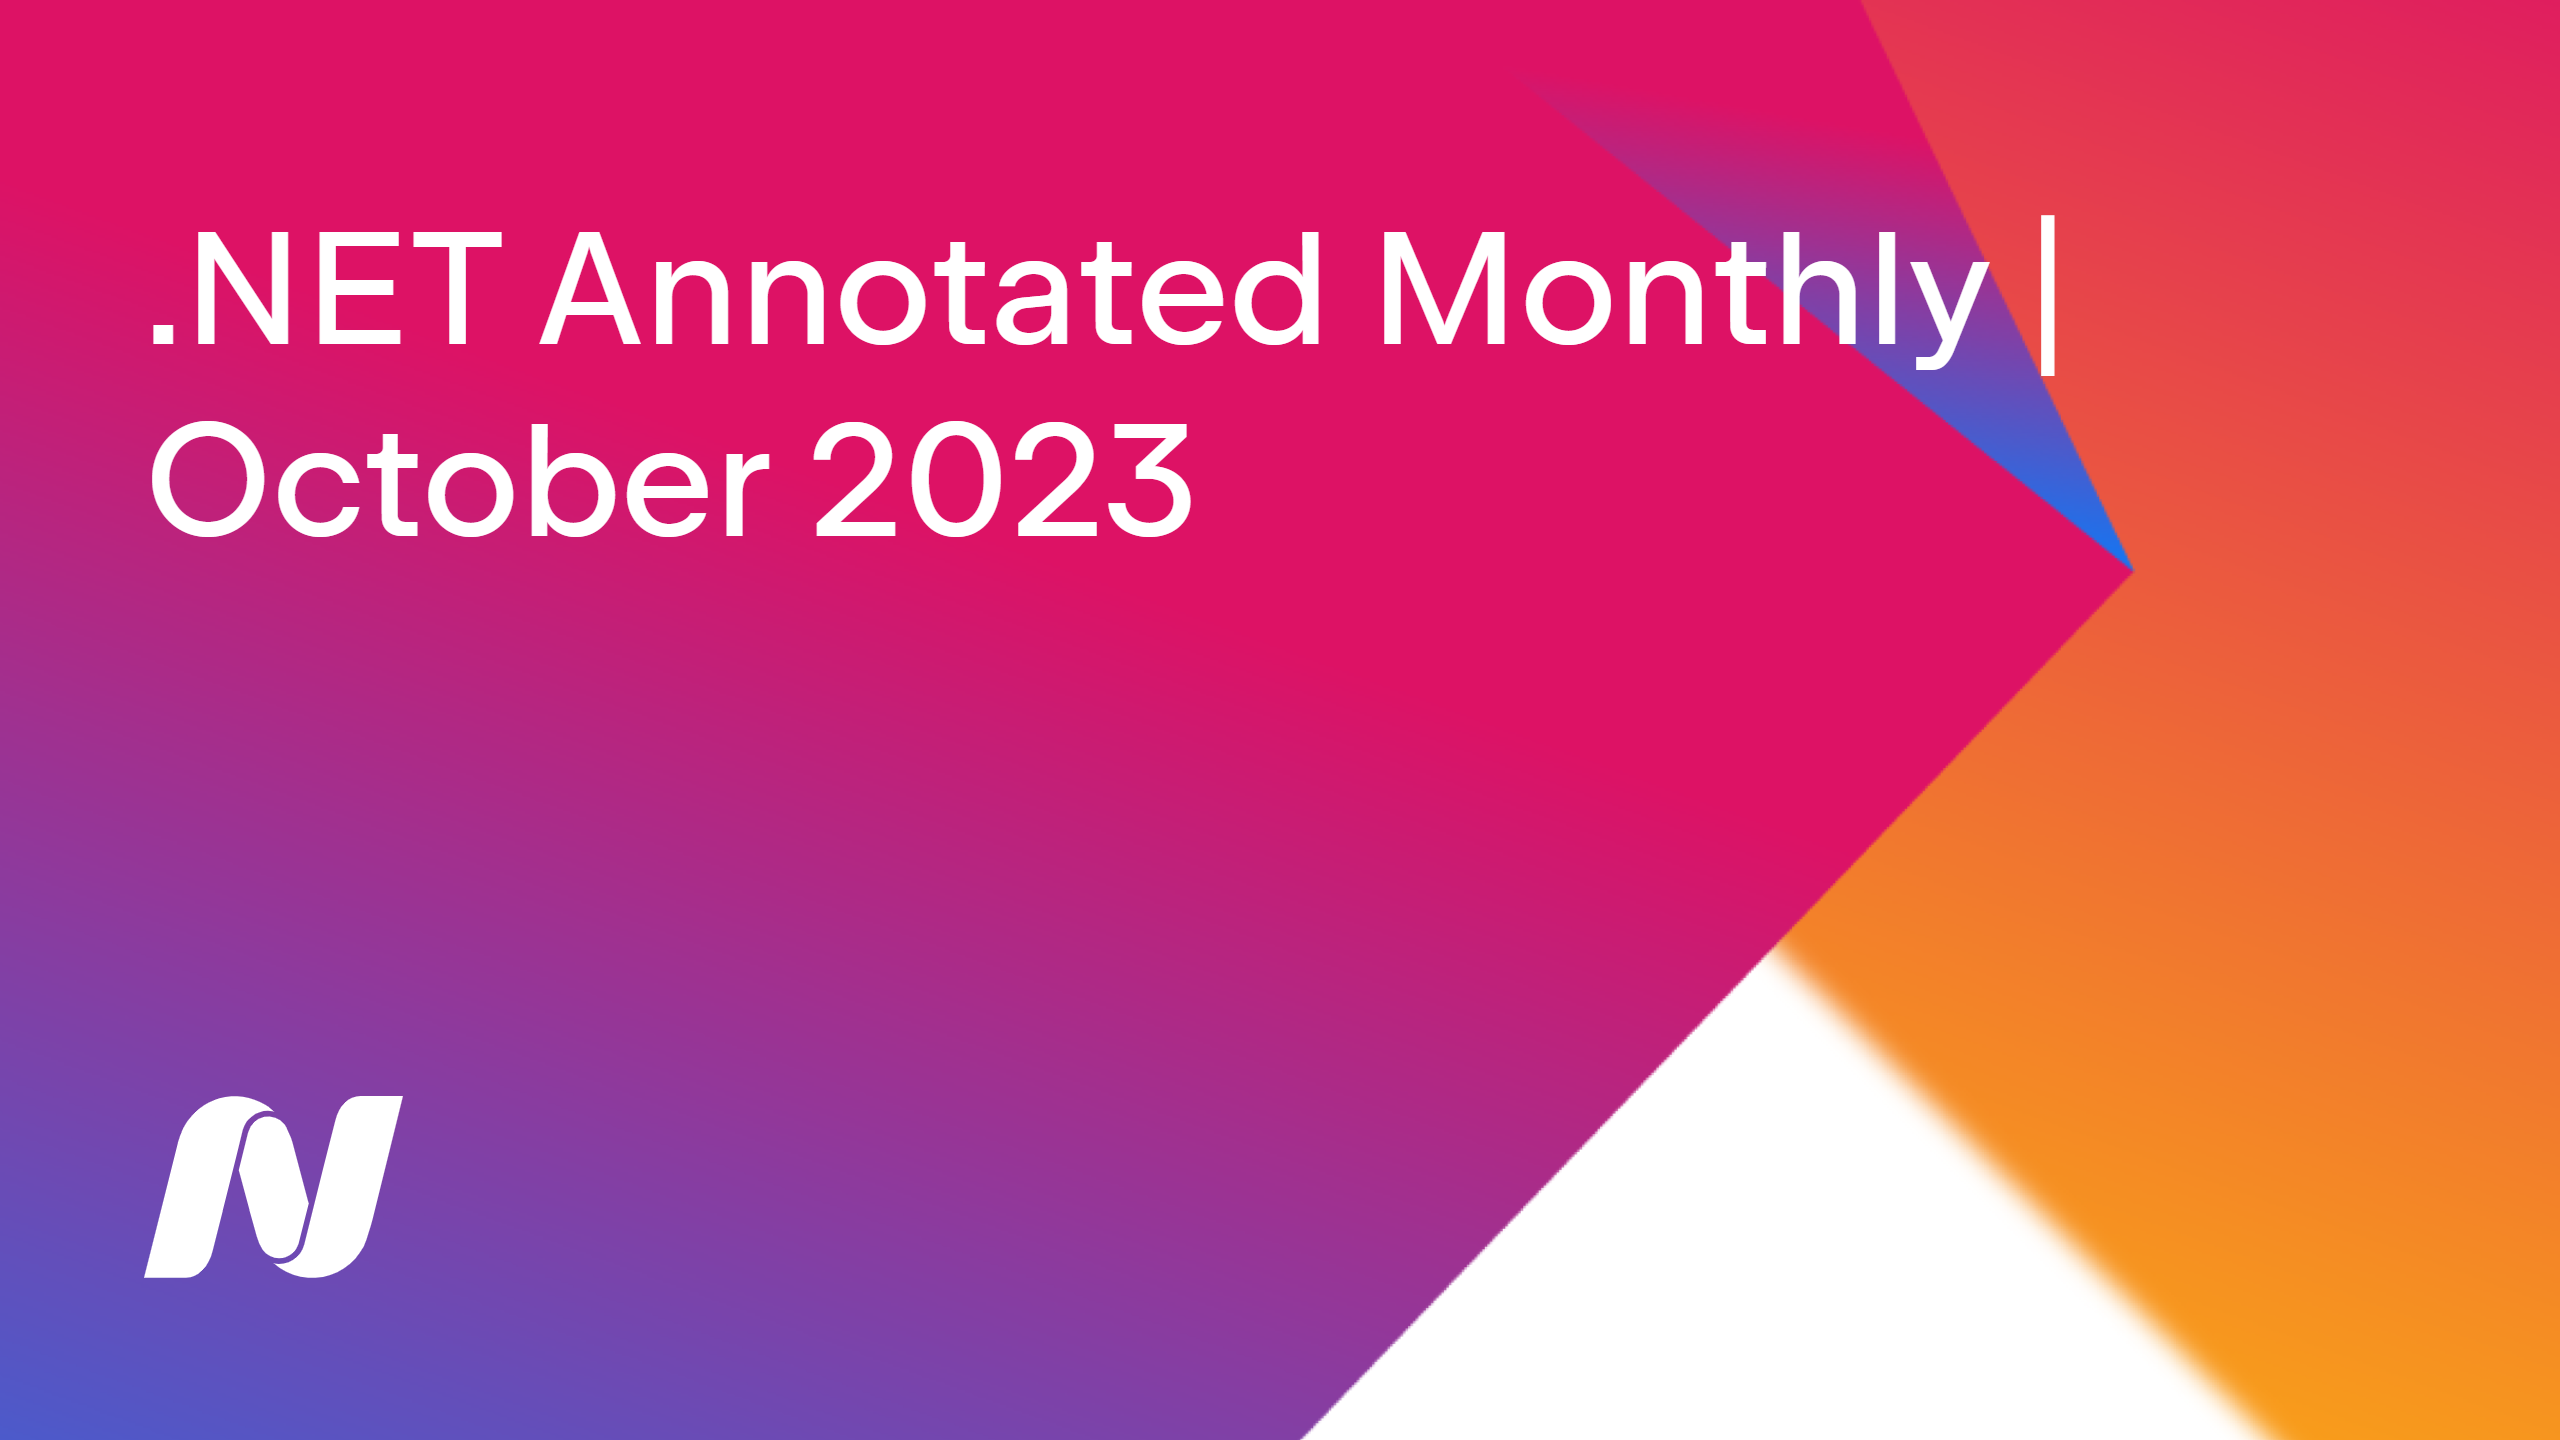 .NET Annotated Monthly | 2023